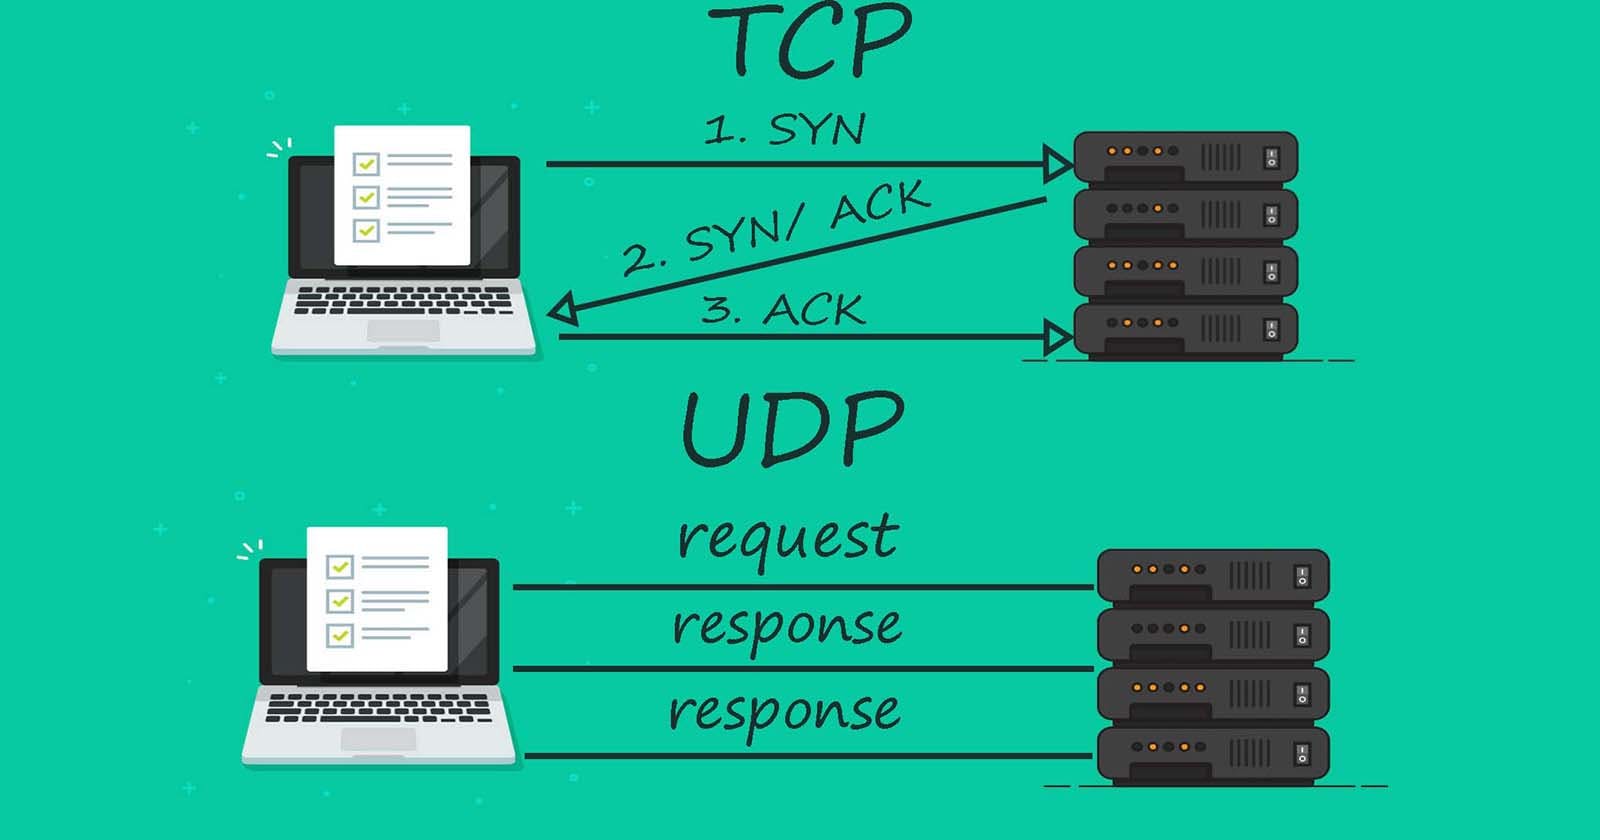 What are TCP and UDP? How do they work?